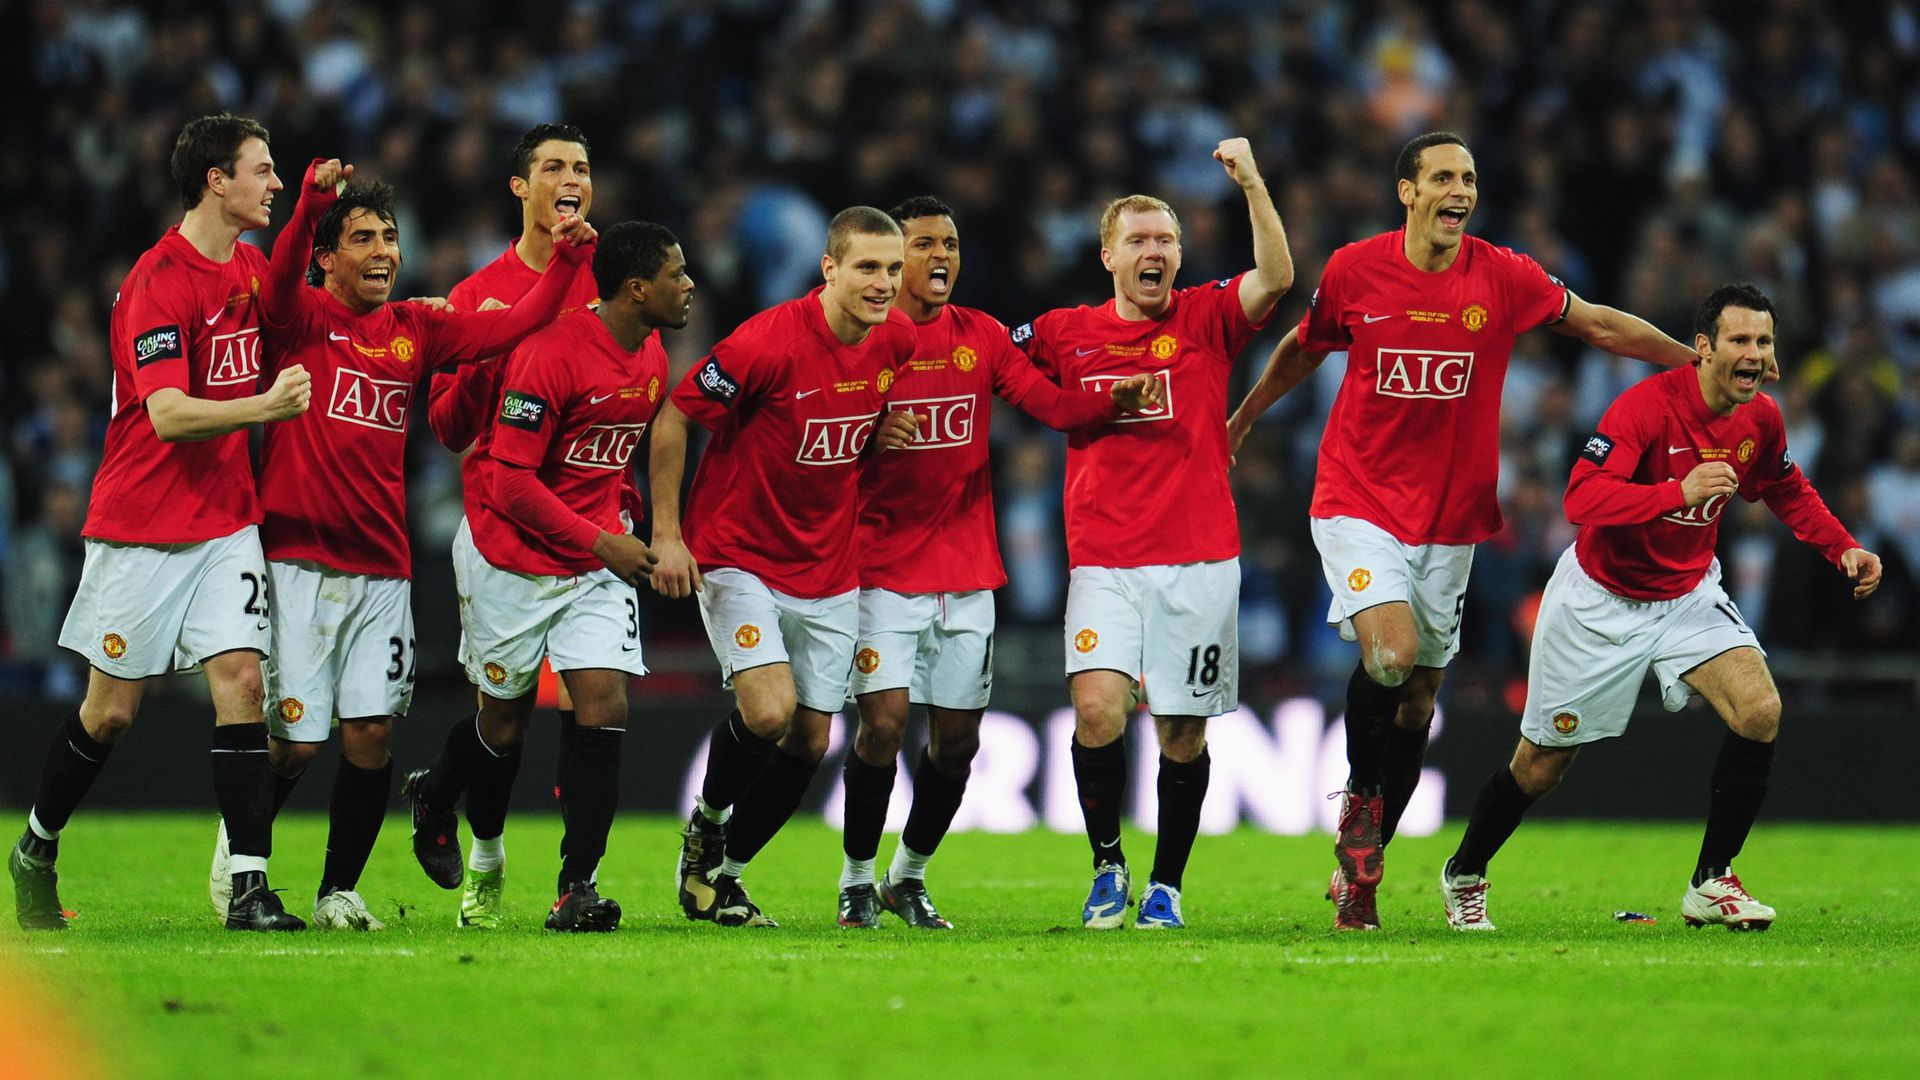 The story of Man United's 2009 League Cup success against Tottenham